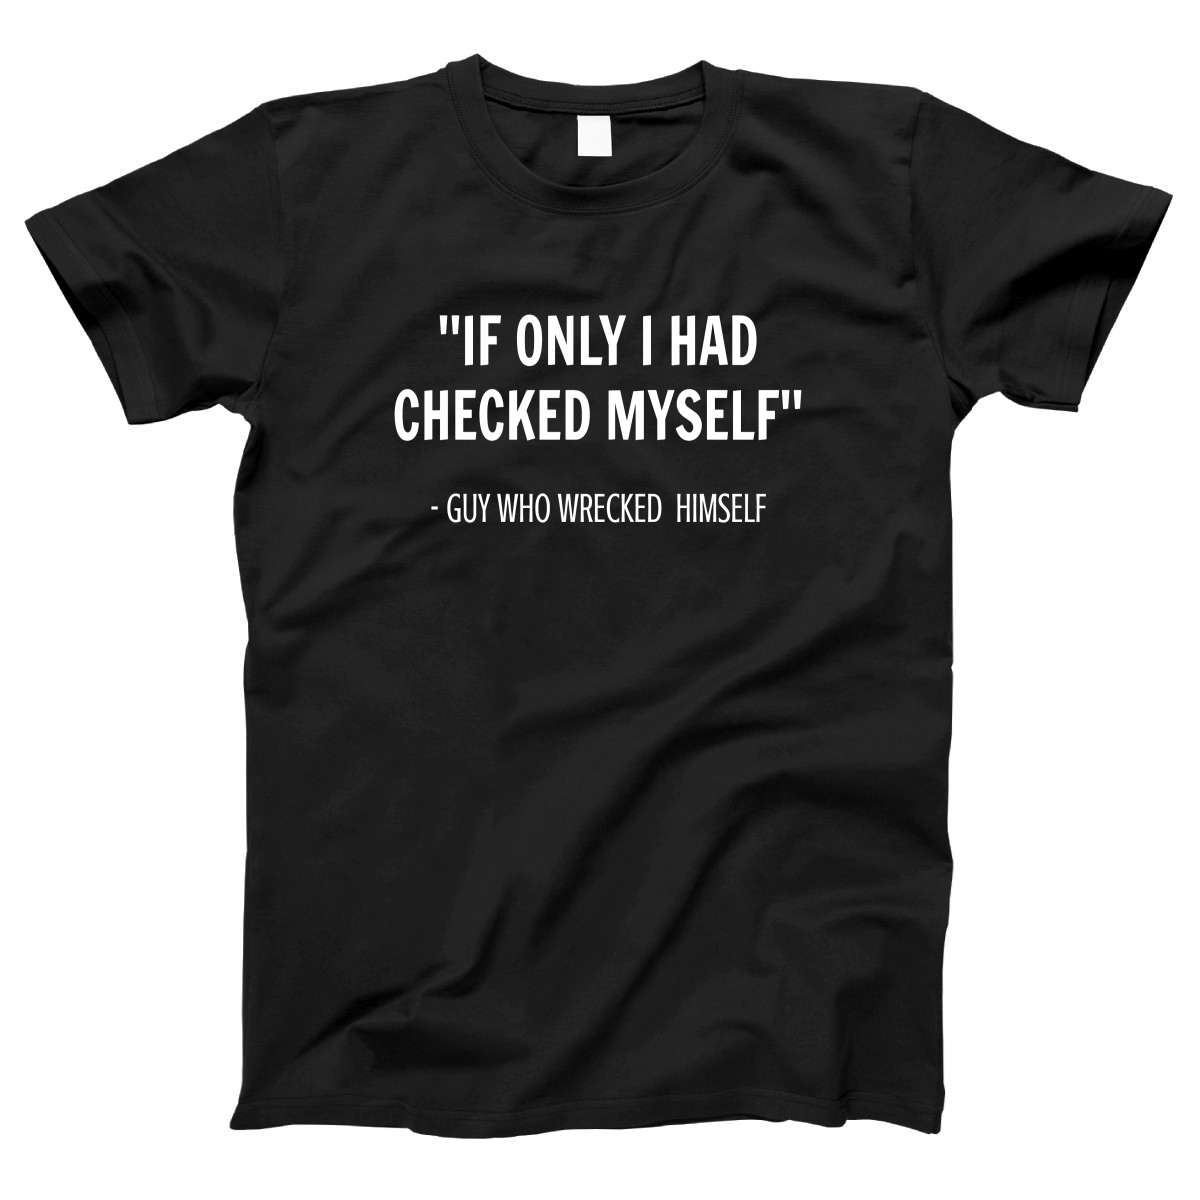 If I only had checked myself Women's T-shirt | Black